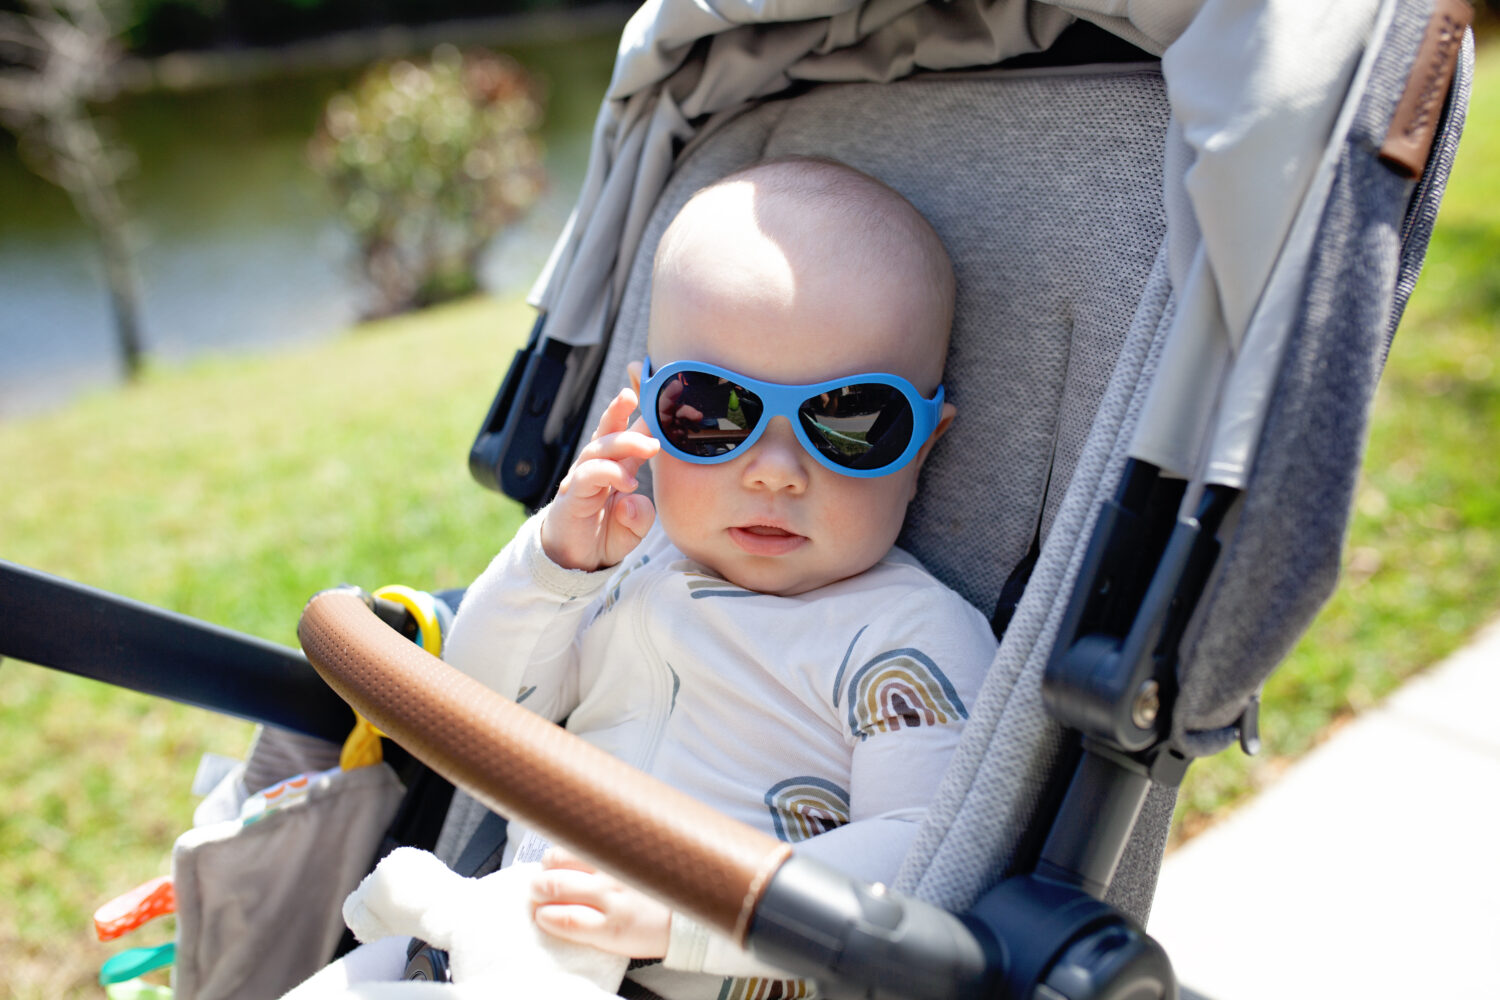 Baby in blue sunglasses sitting in his stroller chillin'